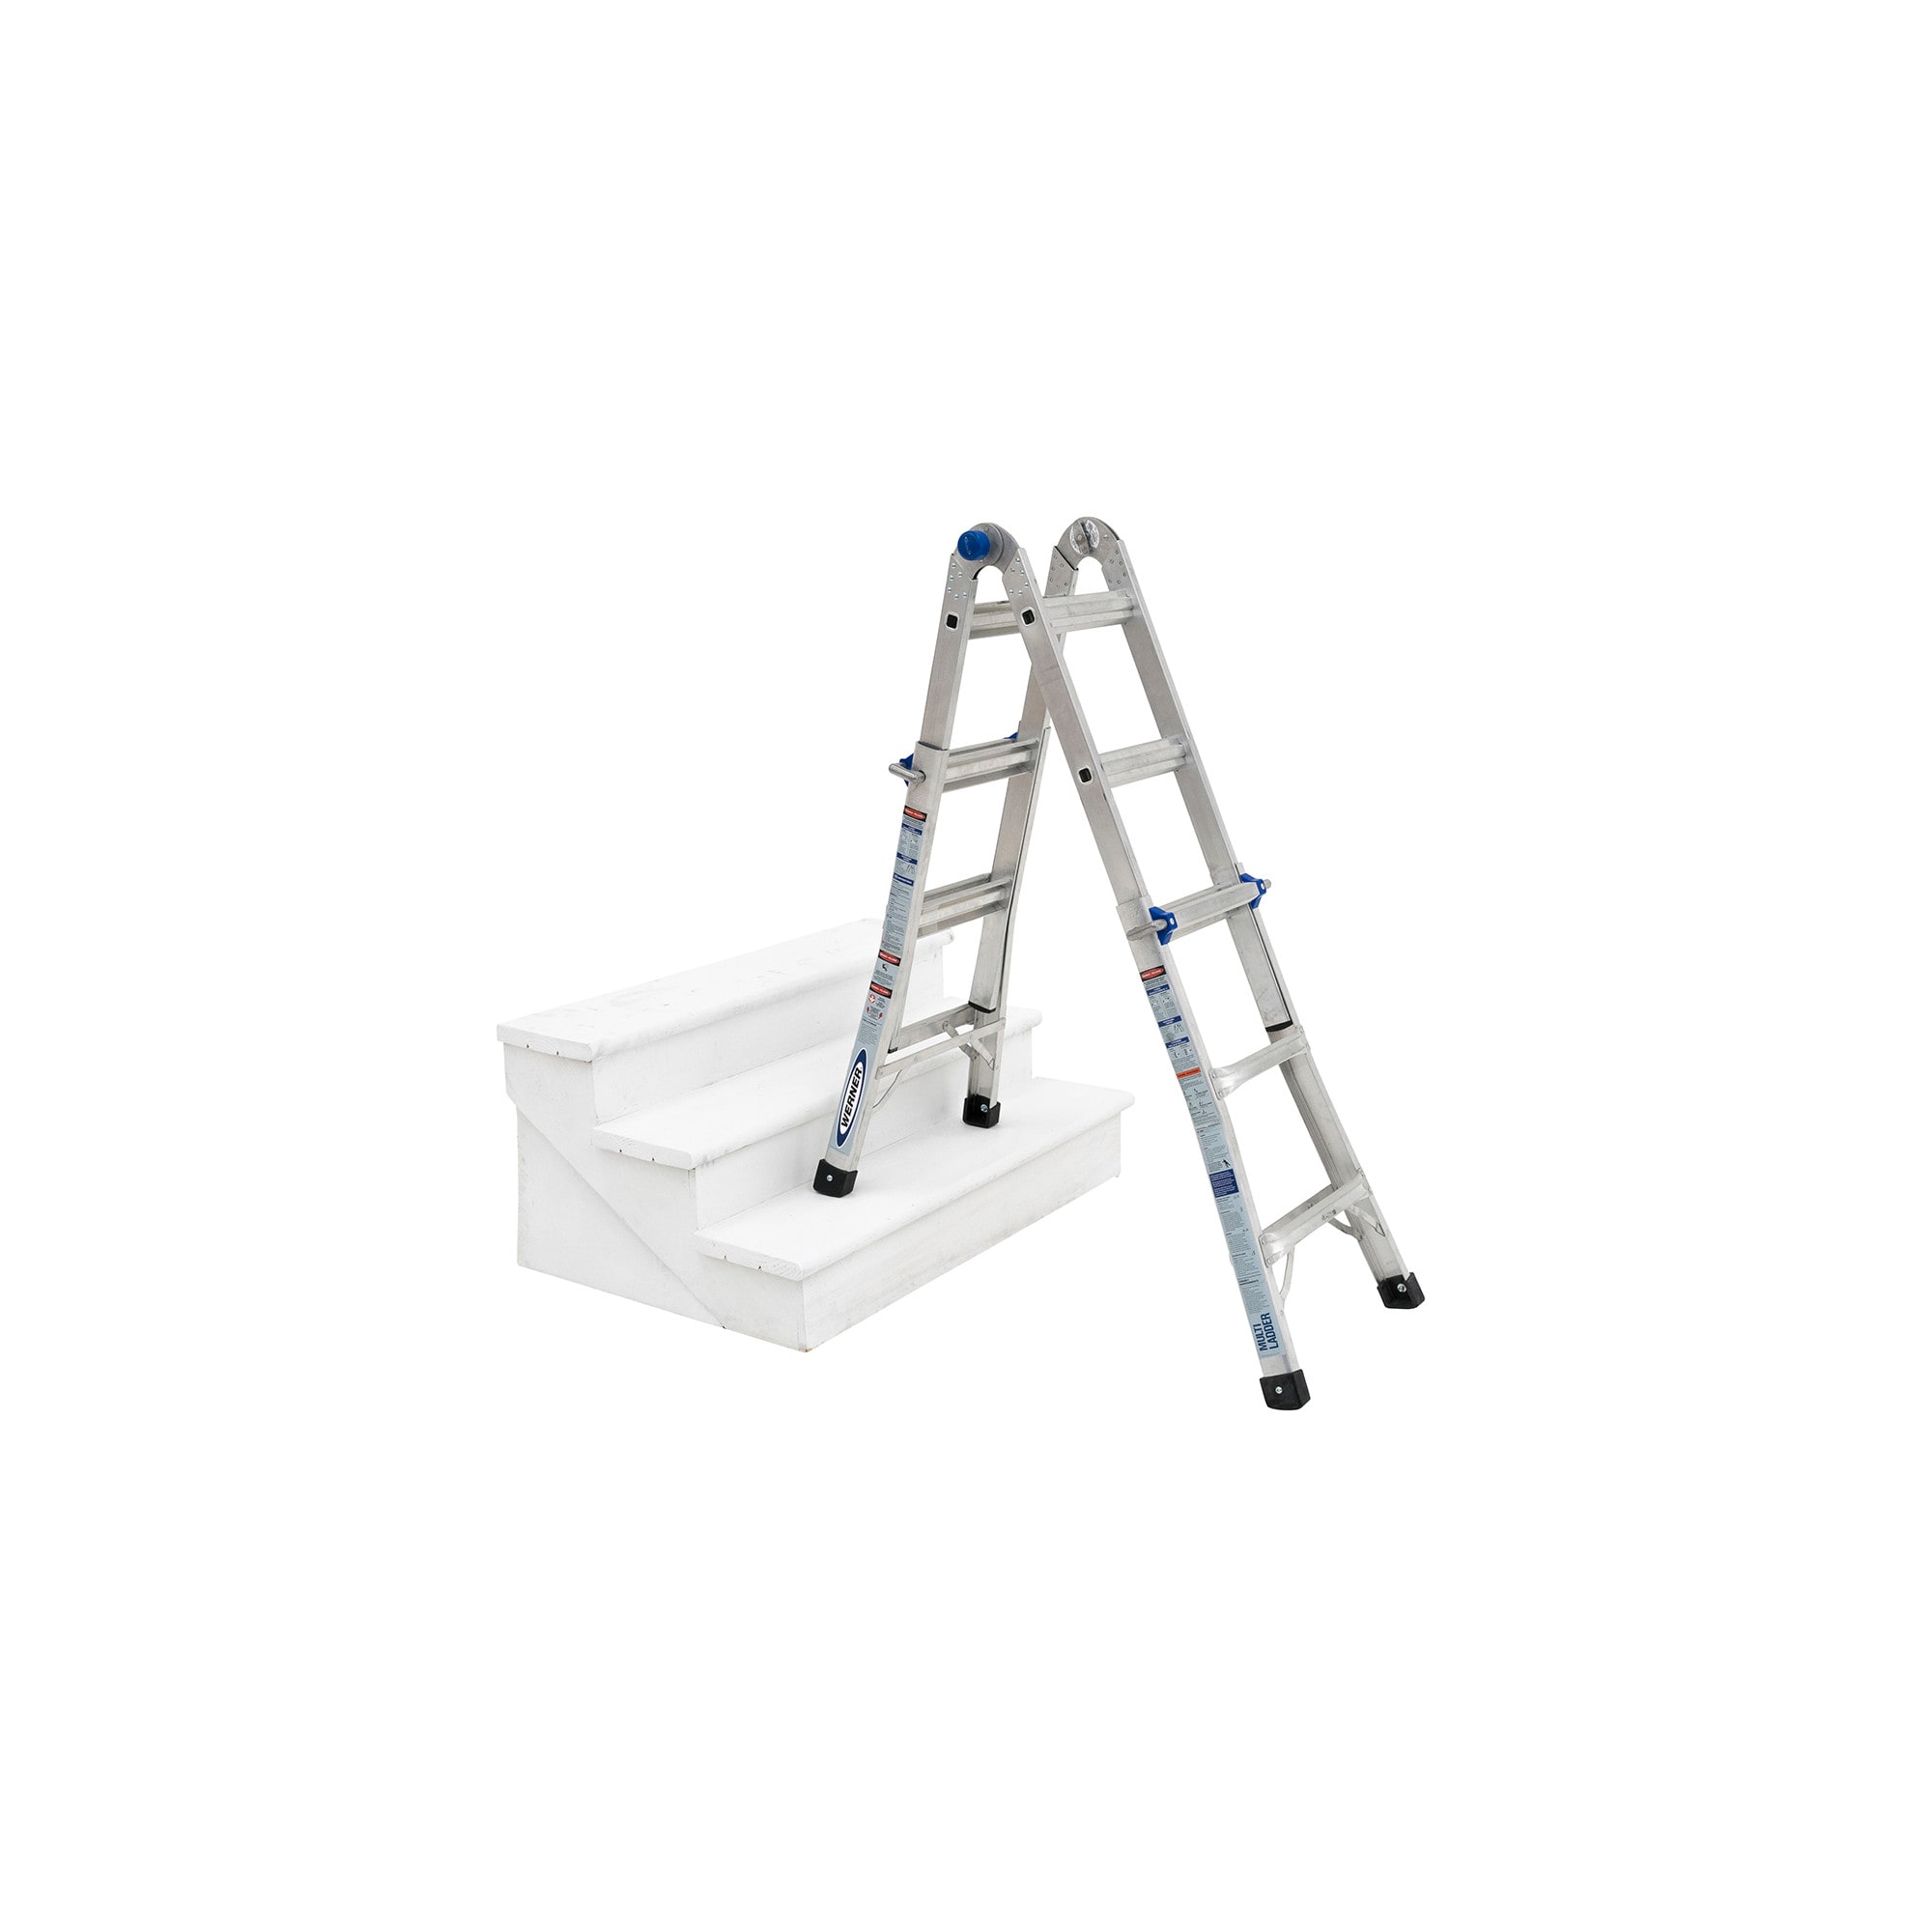 Werner MtIAA 14-ft Reach Type 1aa- 375-lb Load Capacity Telescoping  Multi-Position Ladder at